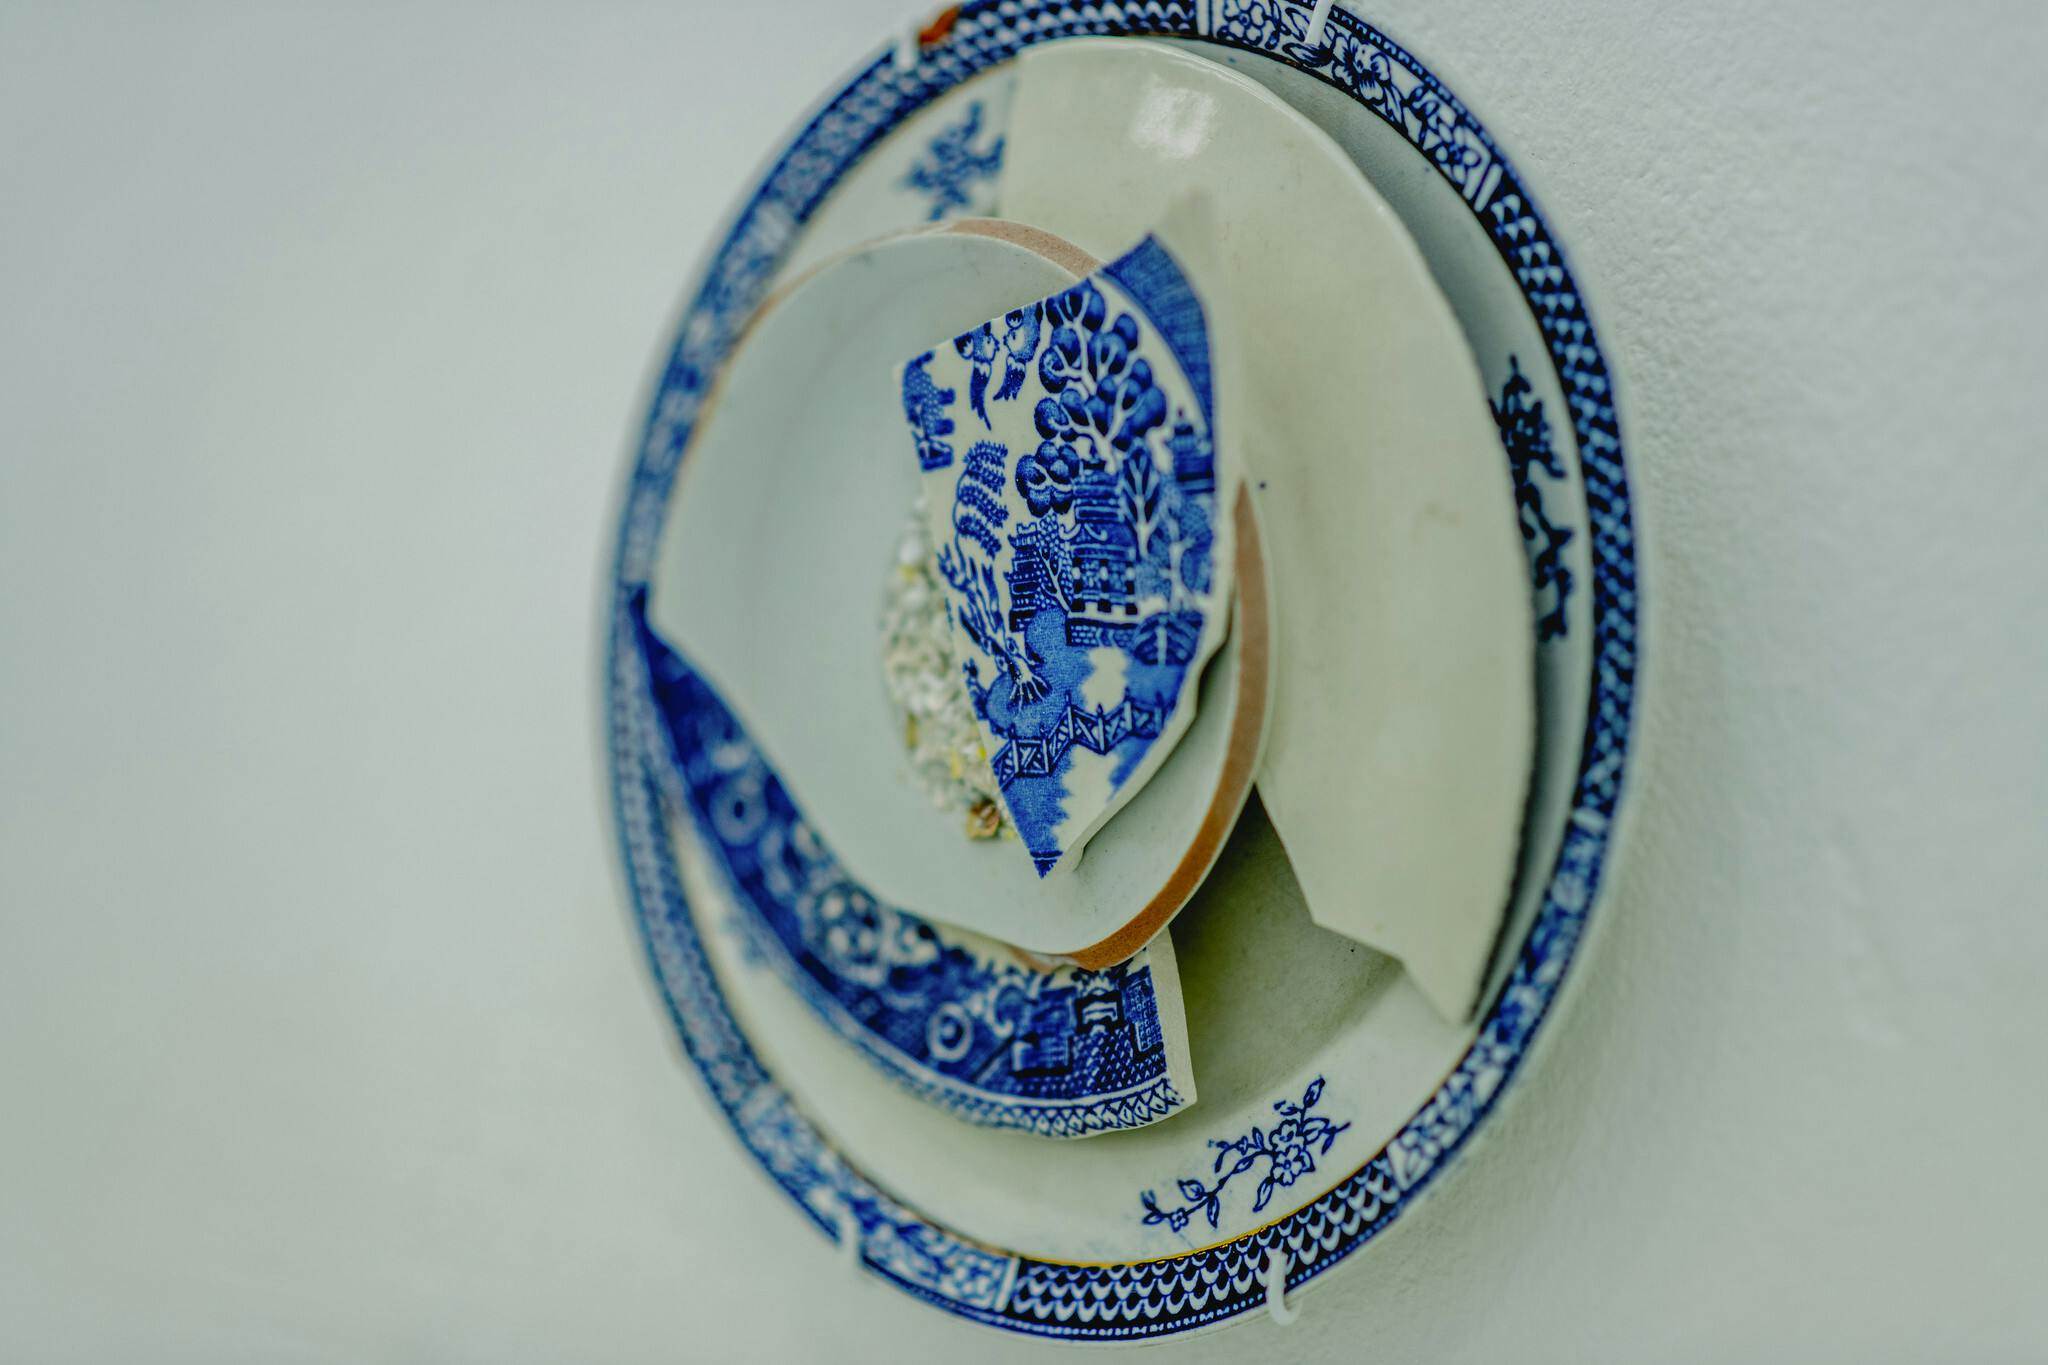 Ceramic artwork Lucia Yonge, shards of blue and white patterned plates are layered on each other.